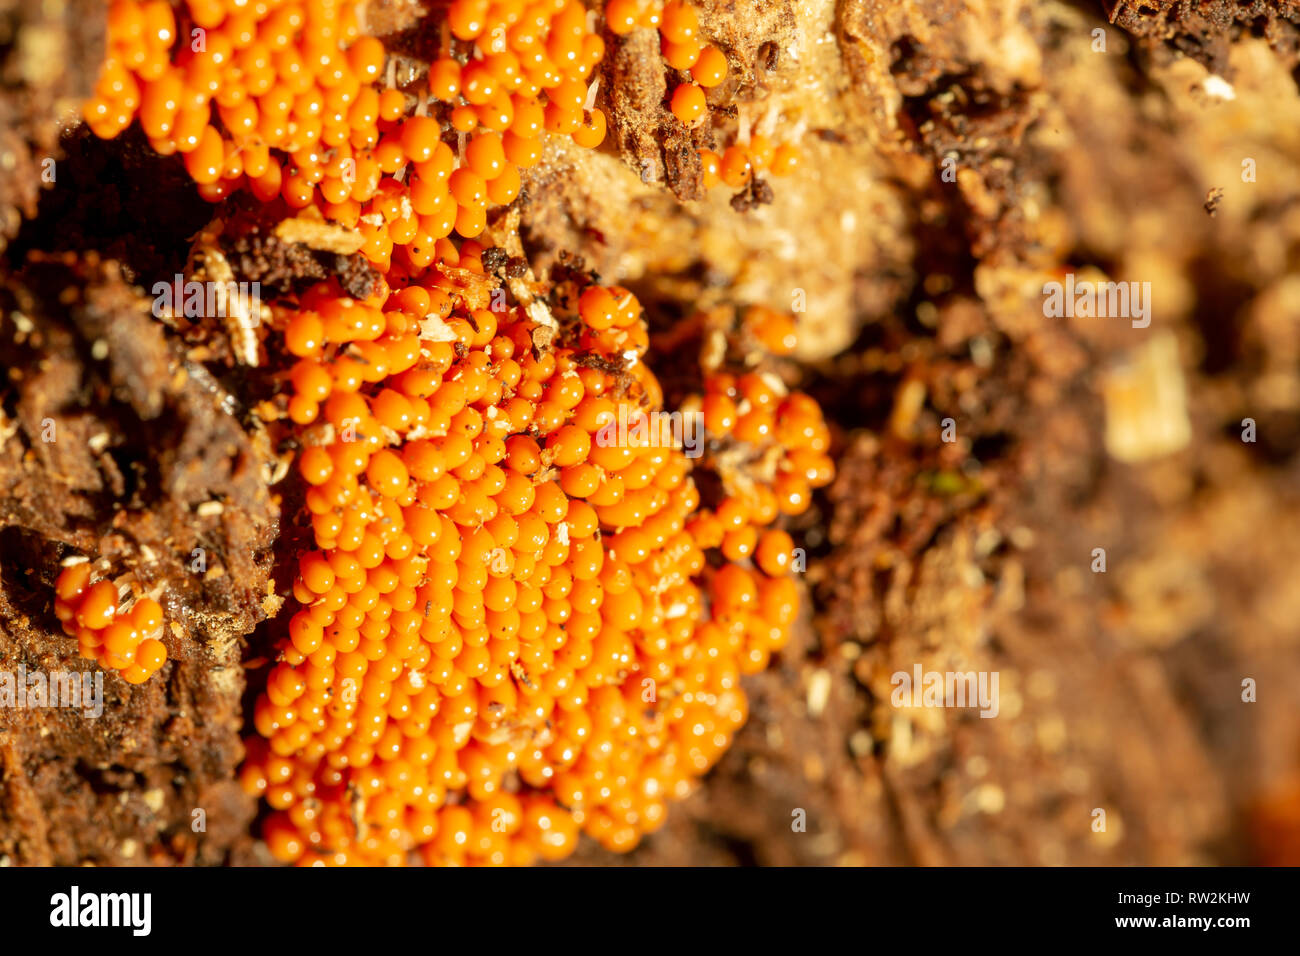 Creative close-up photograph of Yellow spot fungus (Nectria peziza) crowded together on side of dead tree trunk with selective focus. Stock Photo